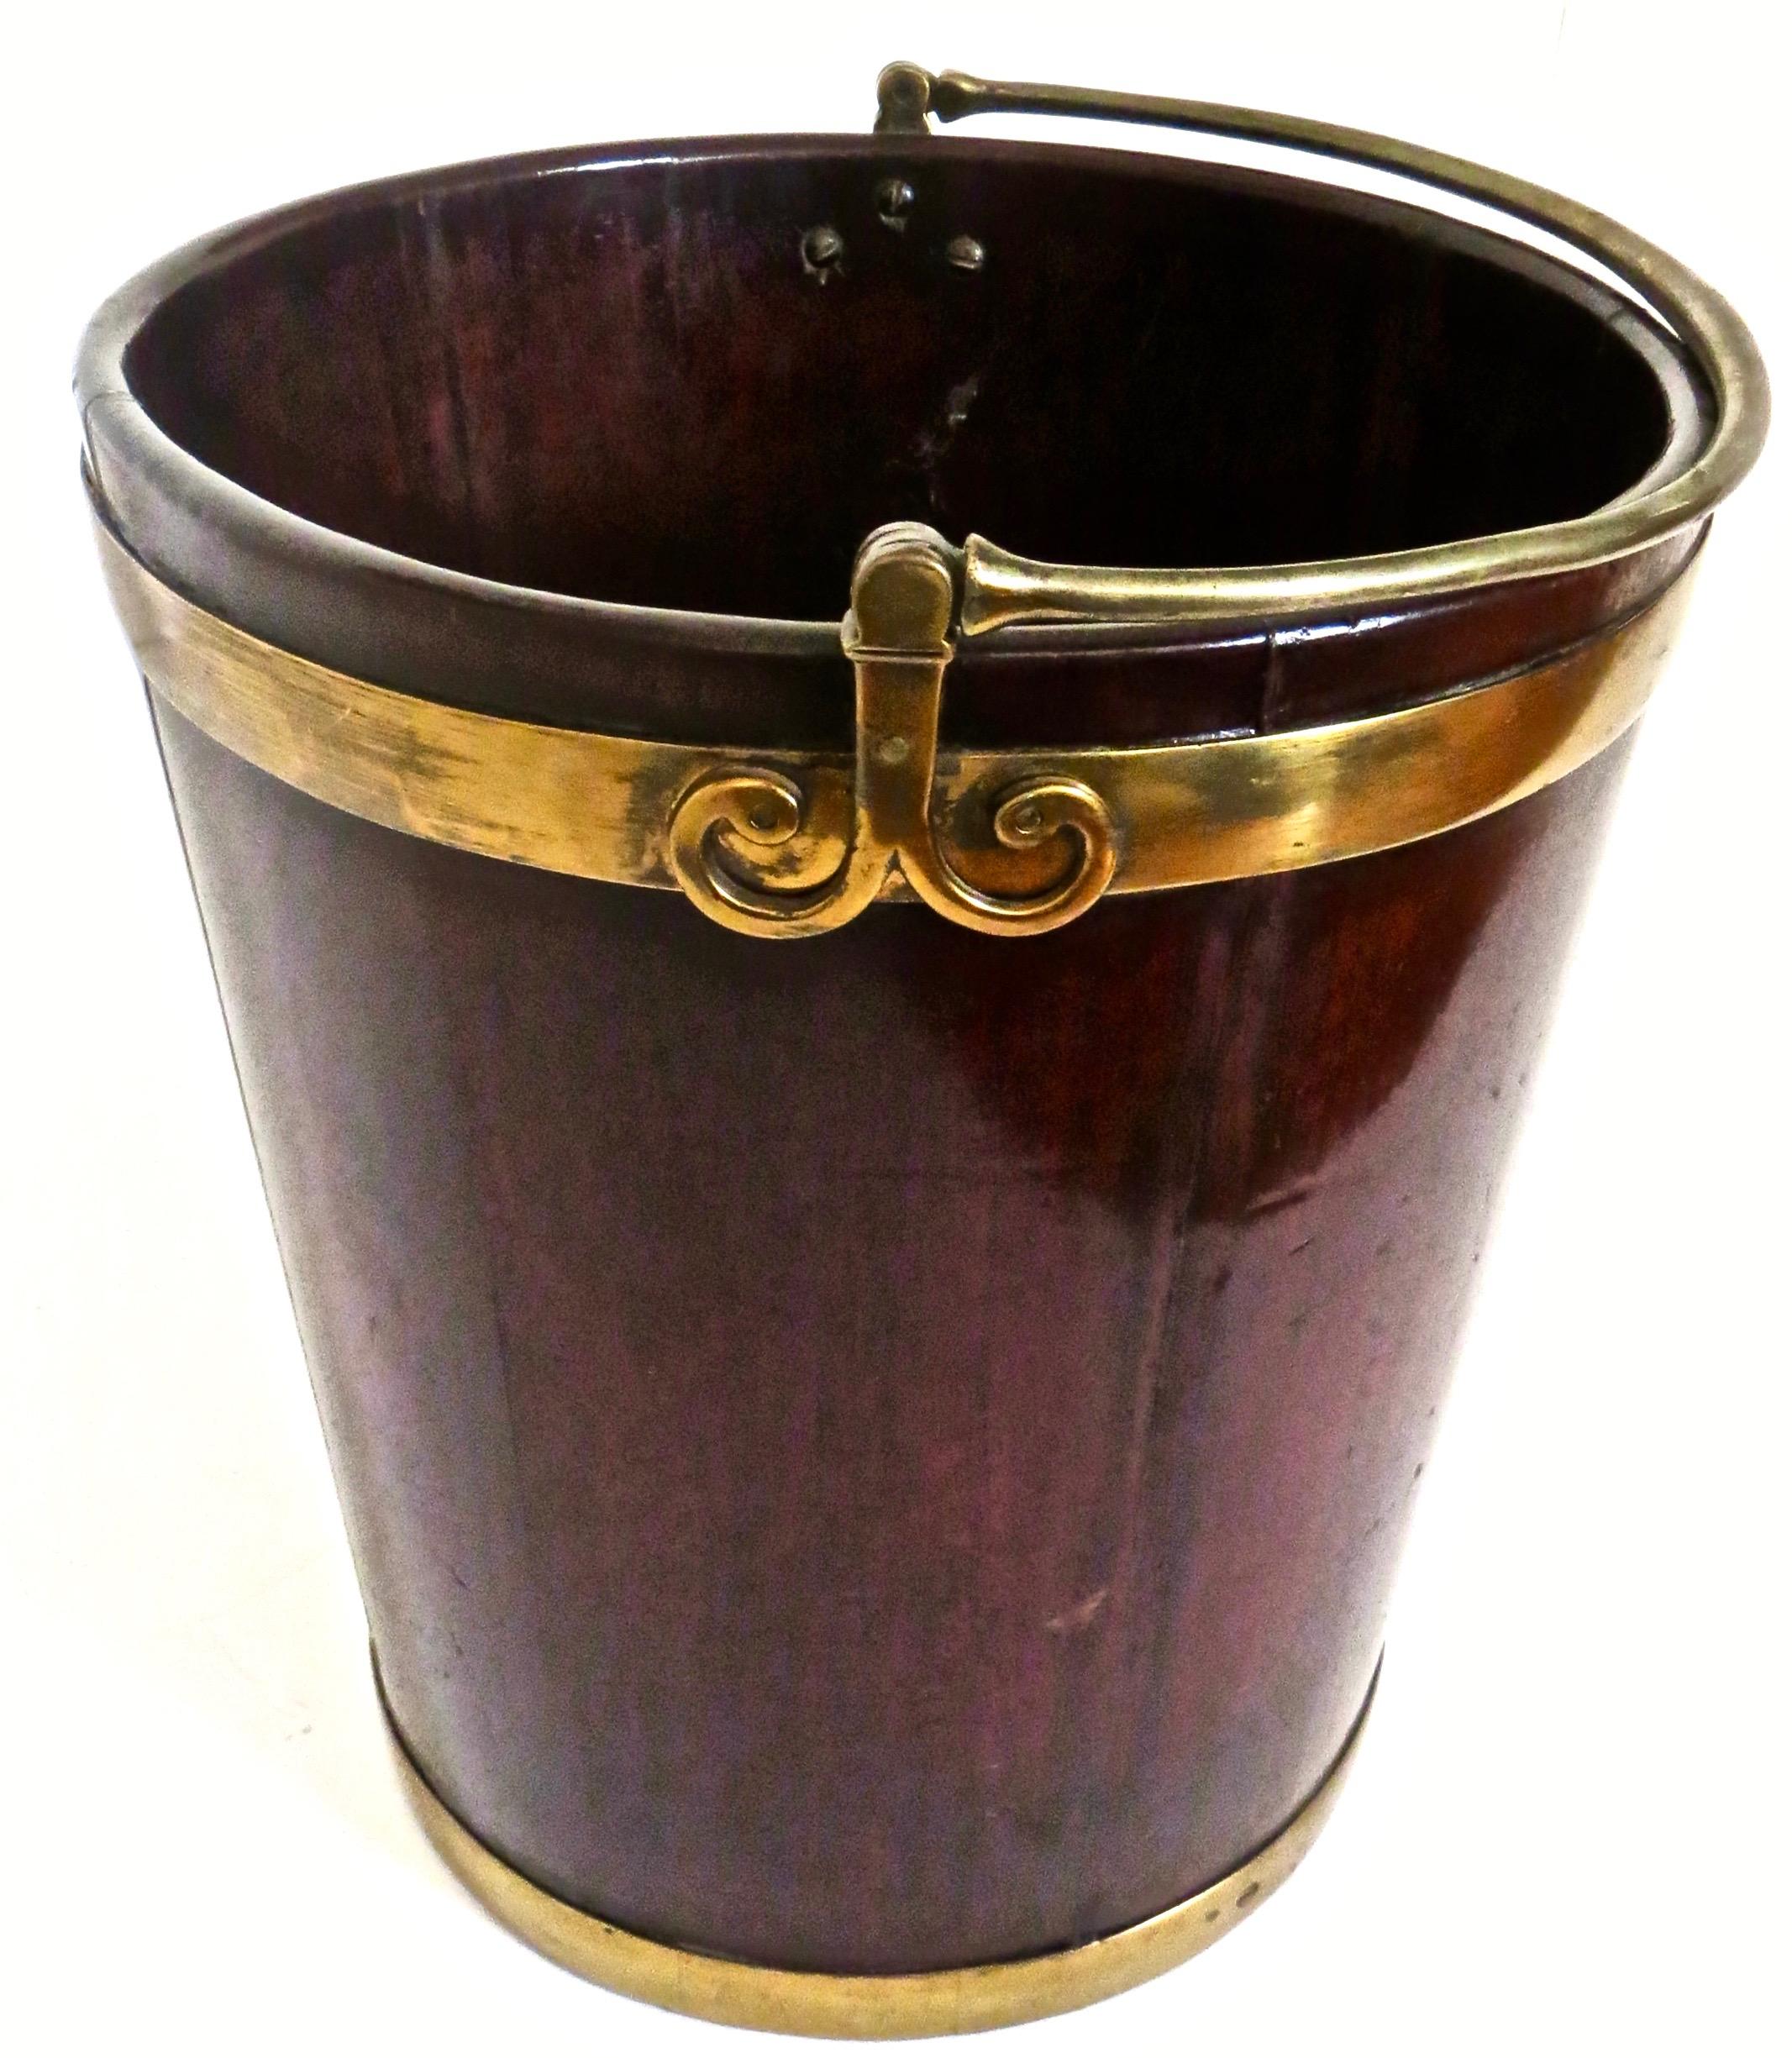 Pair of George III Mahogany Brass-Bound Buckets; 1 Peat and 1 Plate, English 5